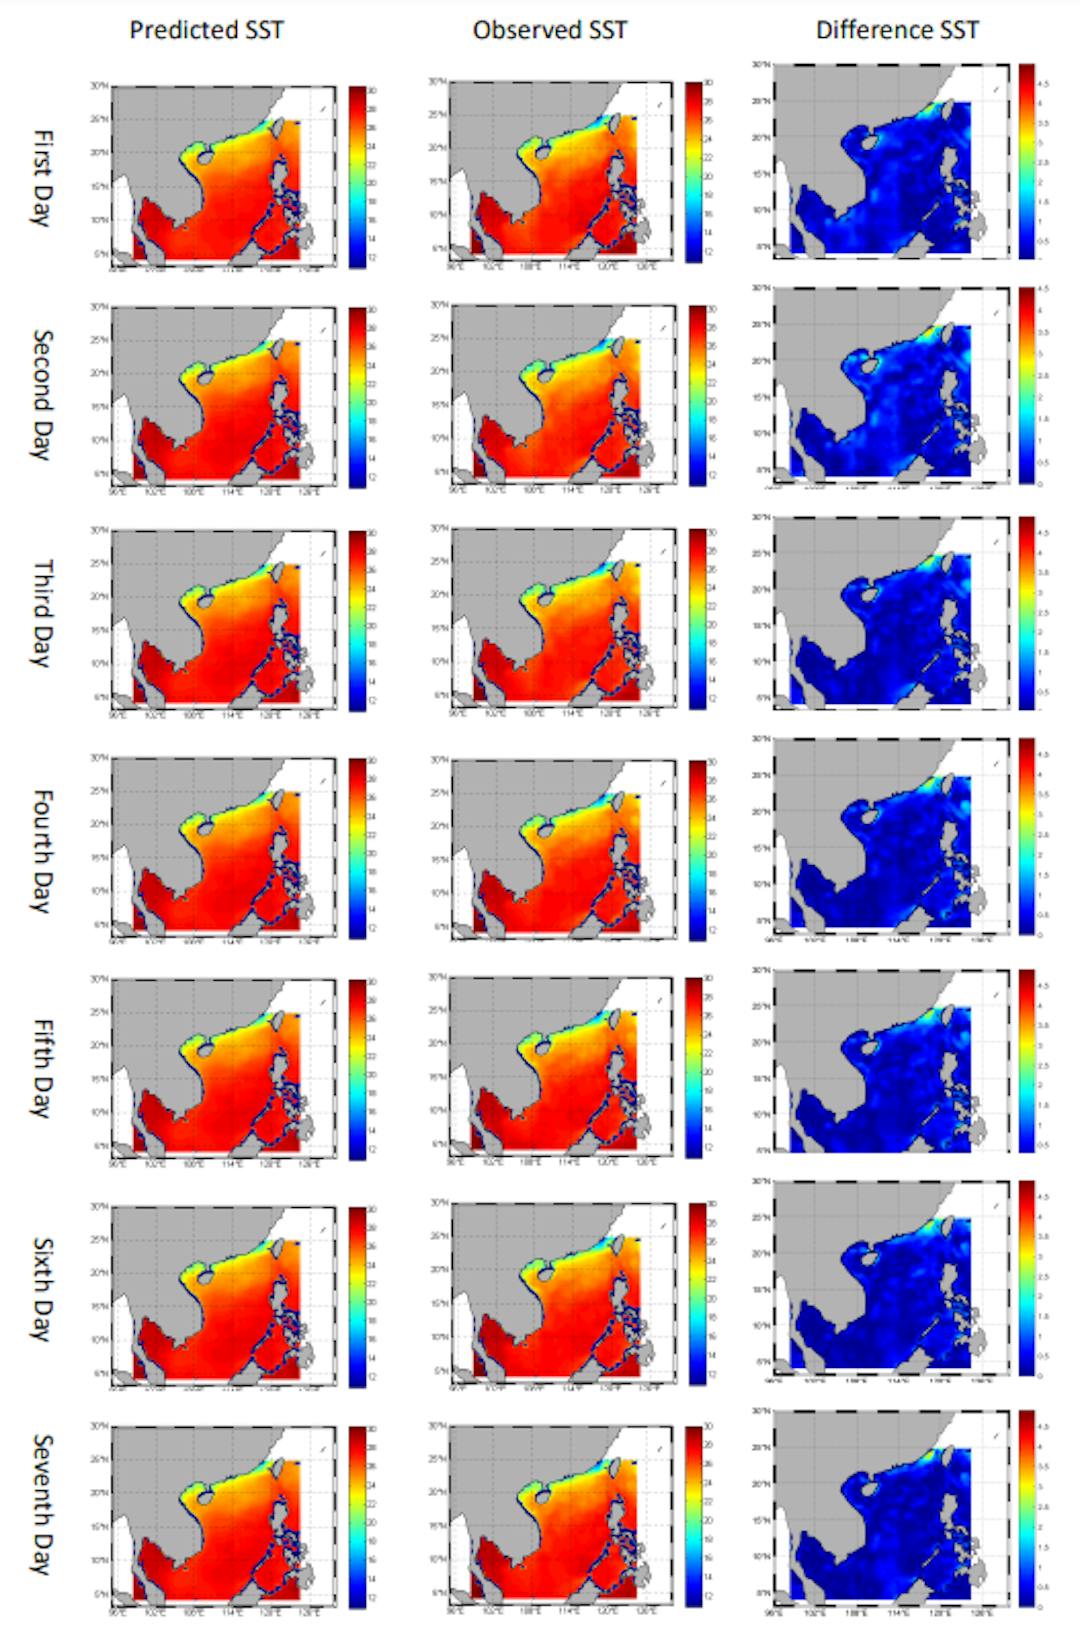 Fig. 12. Visualized results for the next seven-day SST prediction. The first row shows the results of predicted SST. The ground truth observed SST data are shown in the second row. We present their difference in the third row.